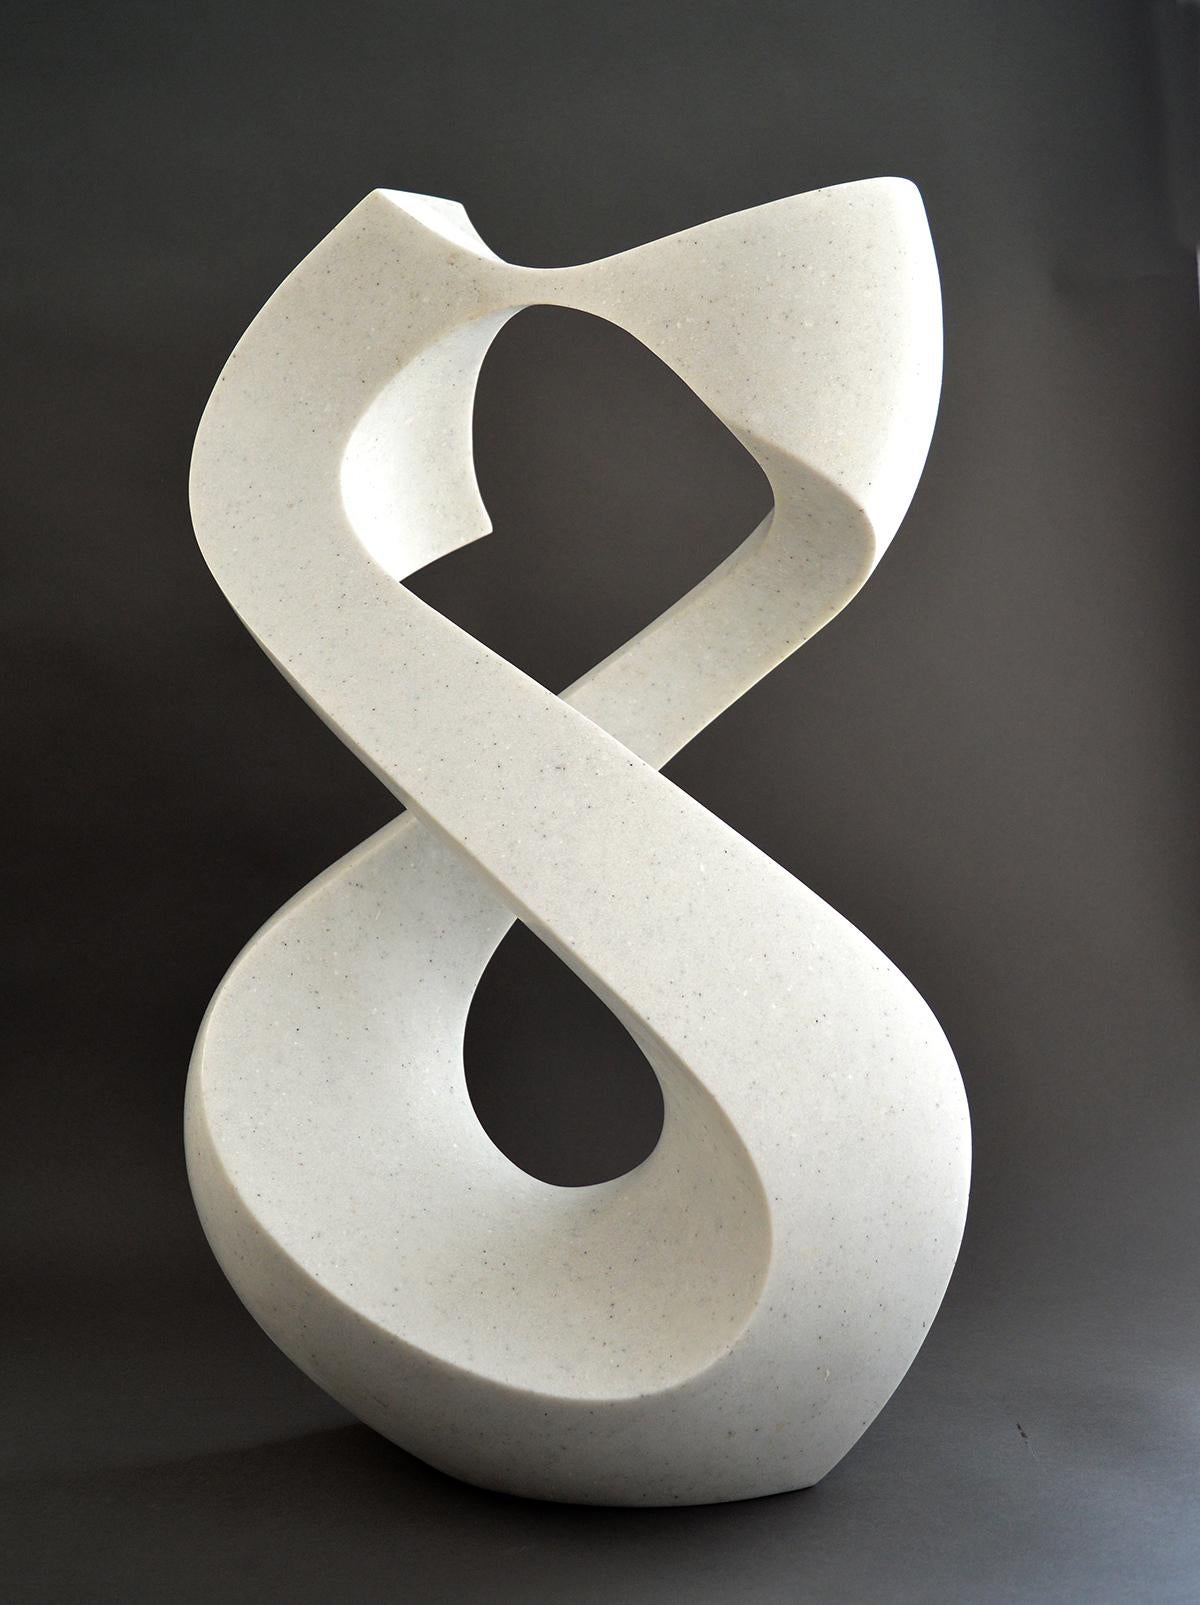 Halcyon White 4/50 - smooth, polished, abstract, engineered stone sculpture - Black Abstract Sculpture by Jeremy Guy